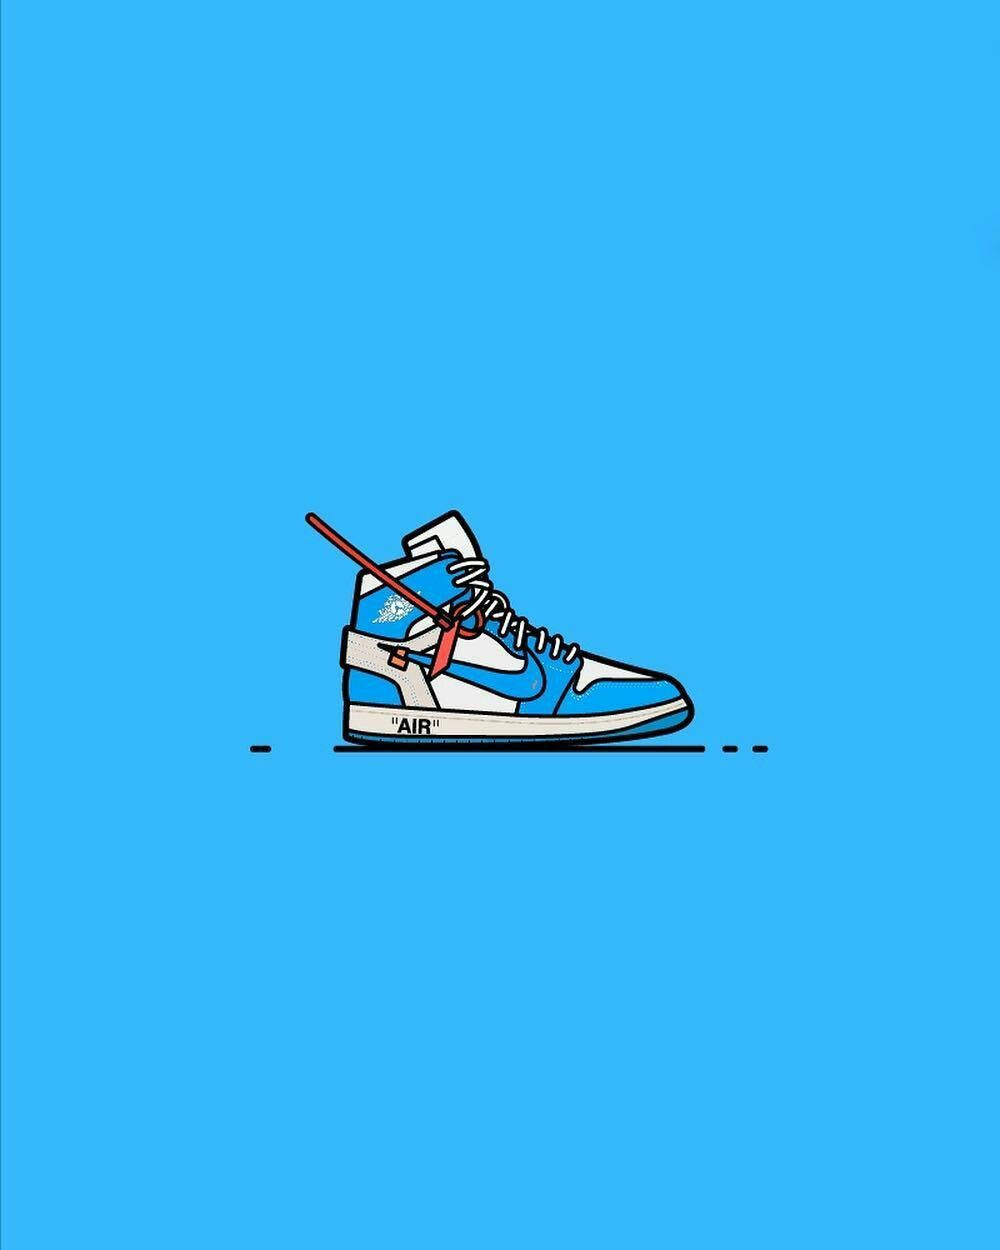 Step Up Your Shoe Game - Cool Nike Shoe Wallpaper